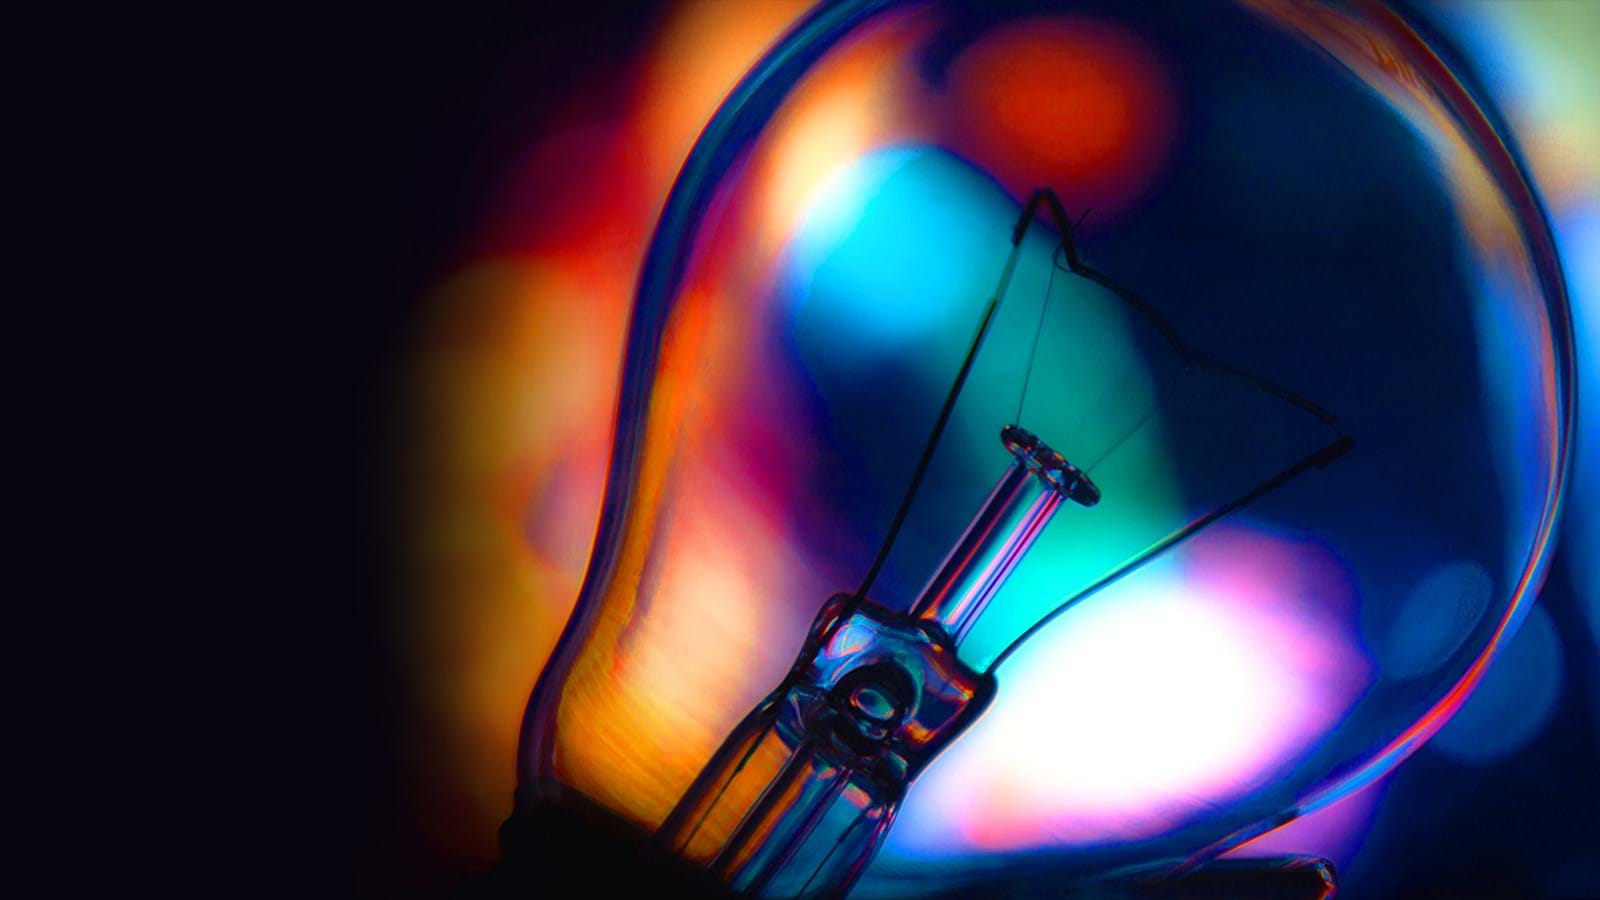 Light bulb representing ideas for digital workplace predictions for 2018